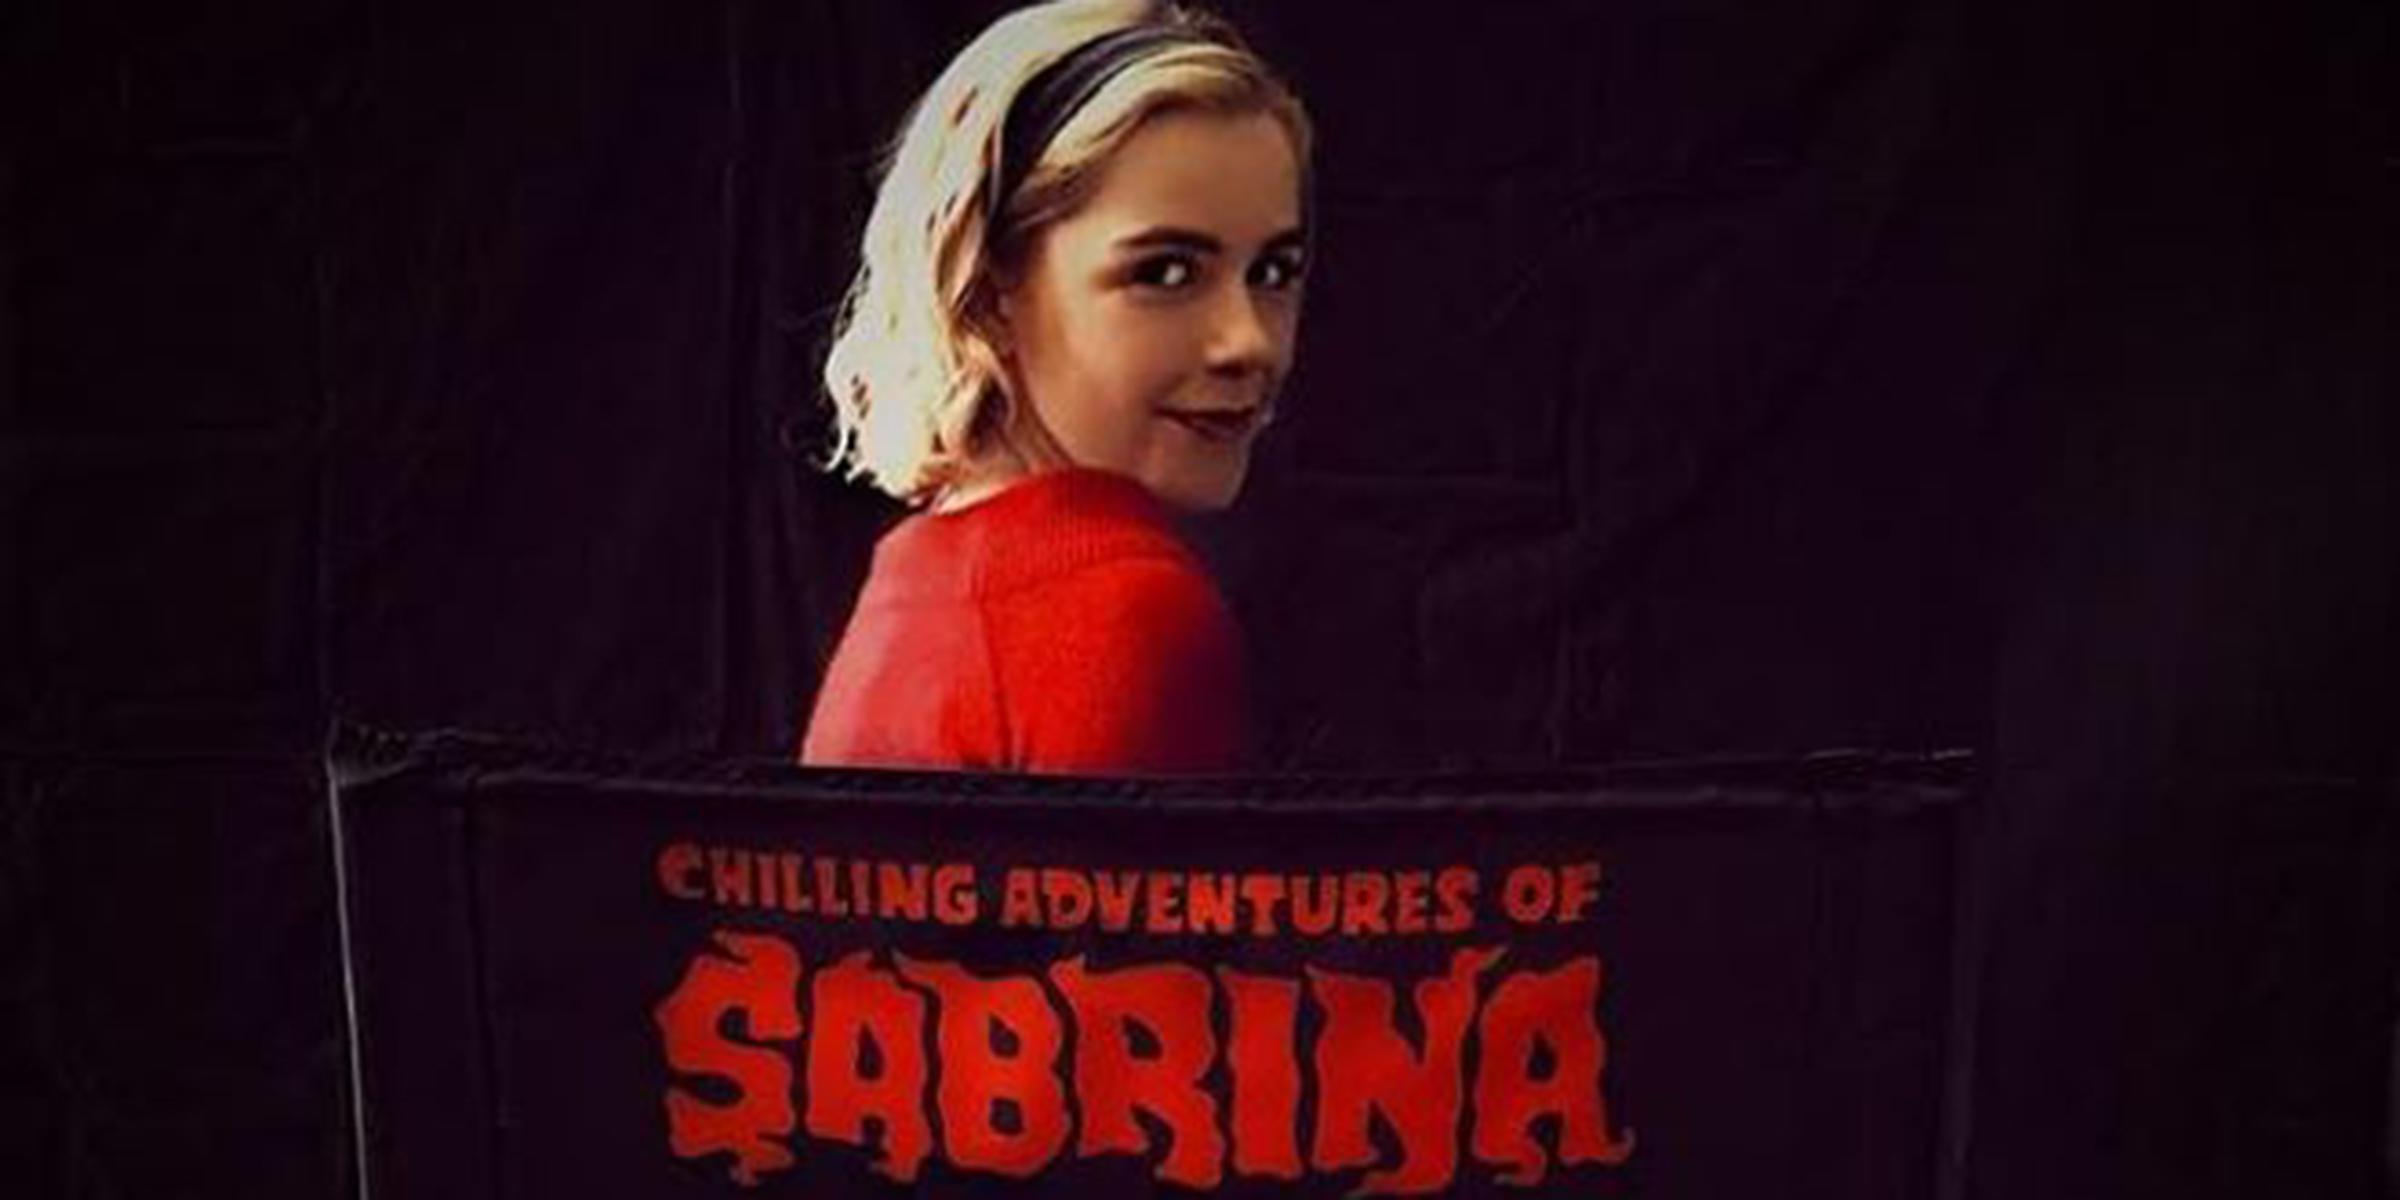 New photo from 'Chilling Adventures of Sabrina' are giving us goose